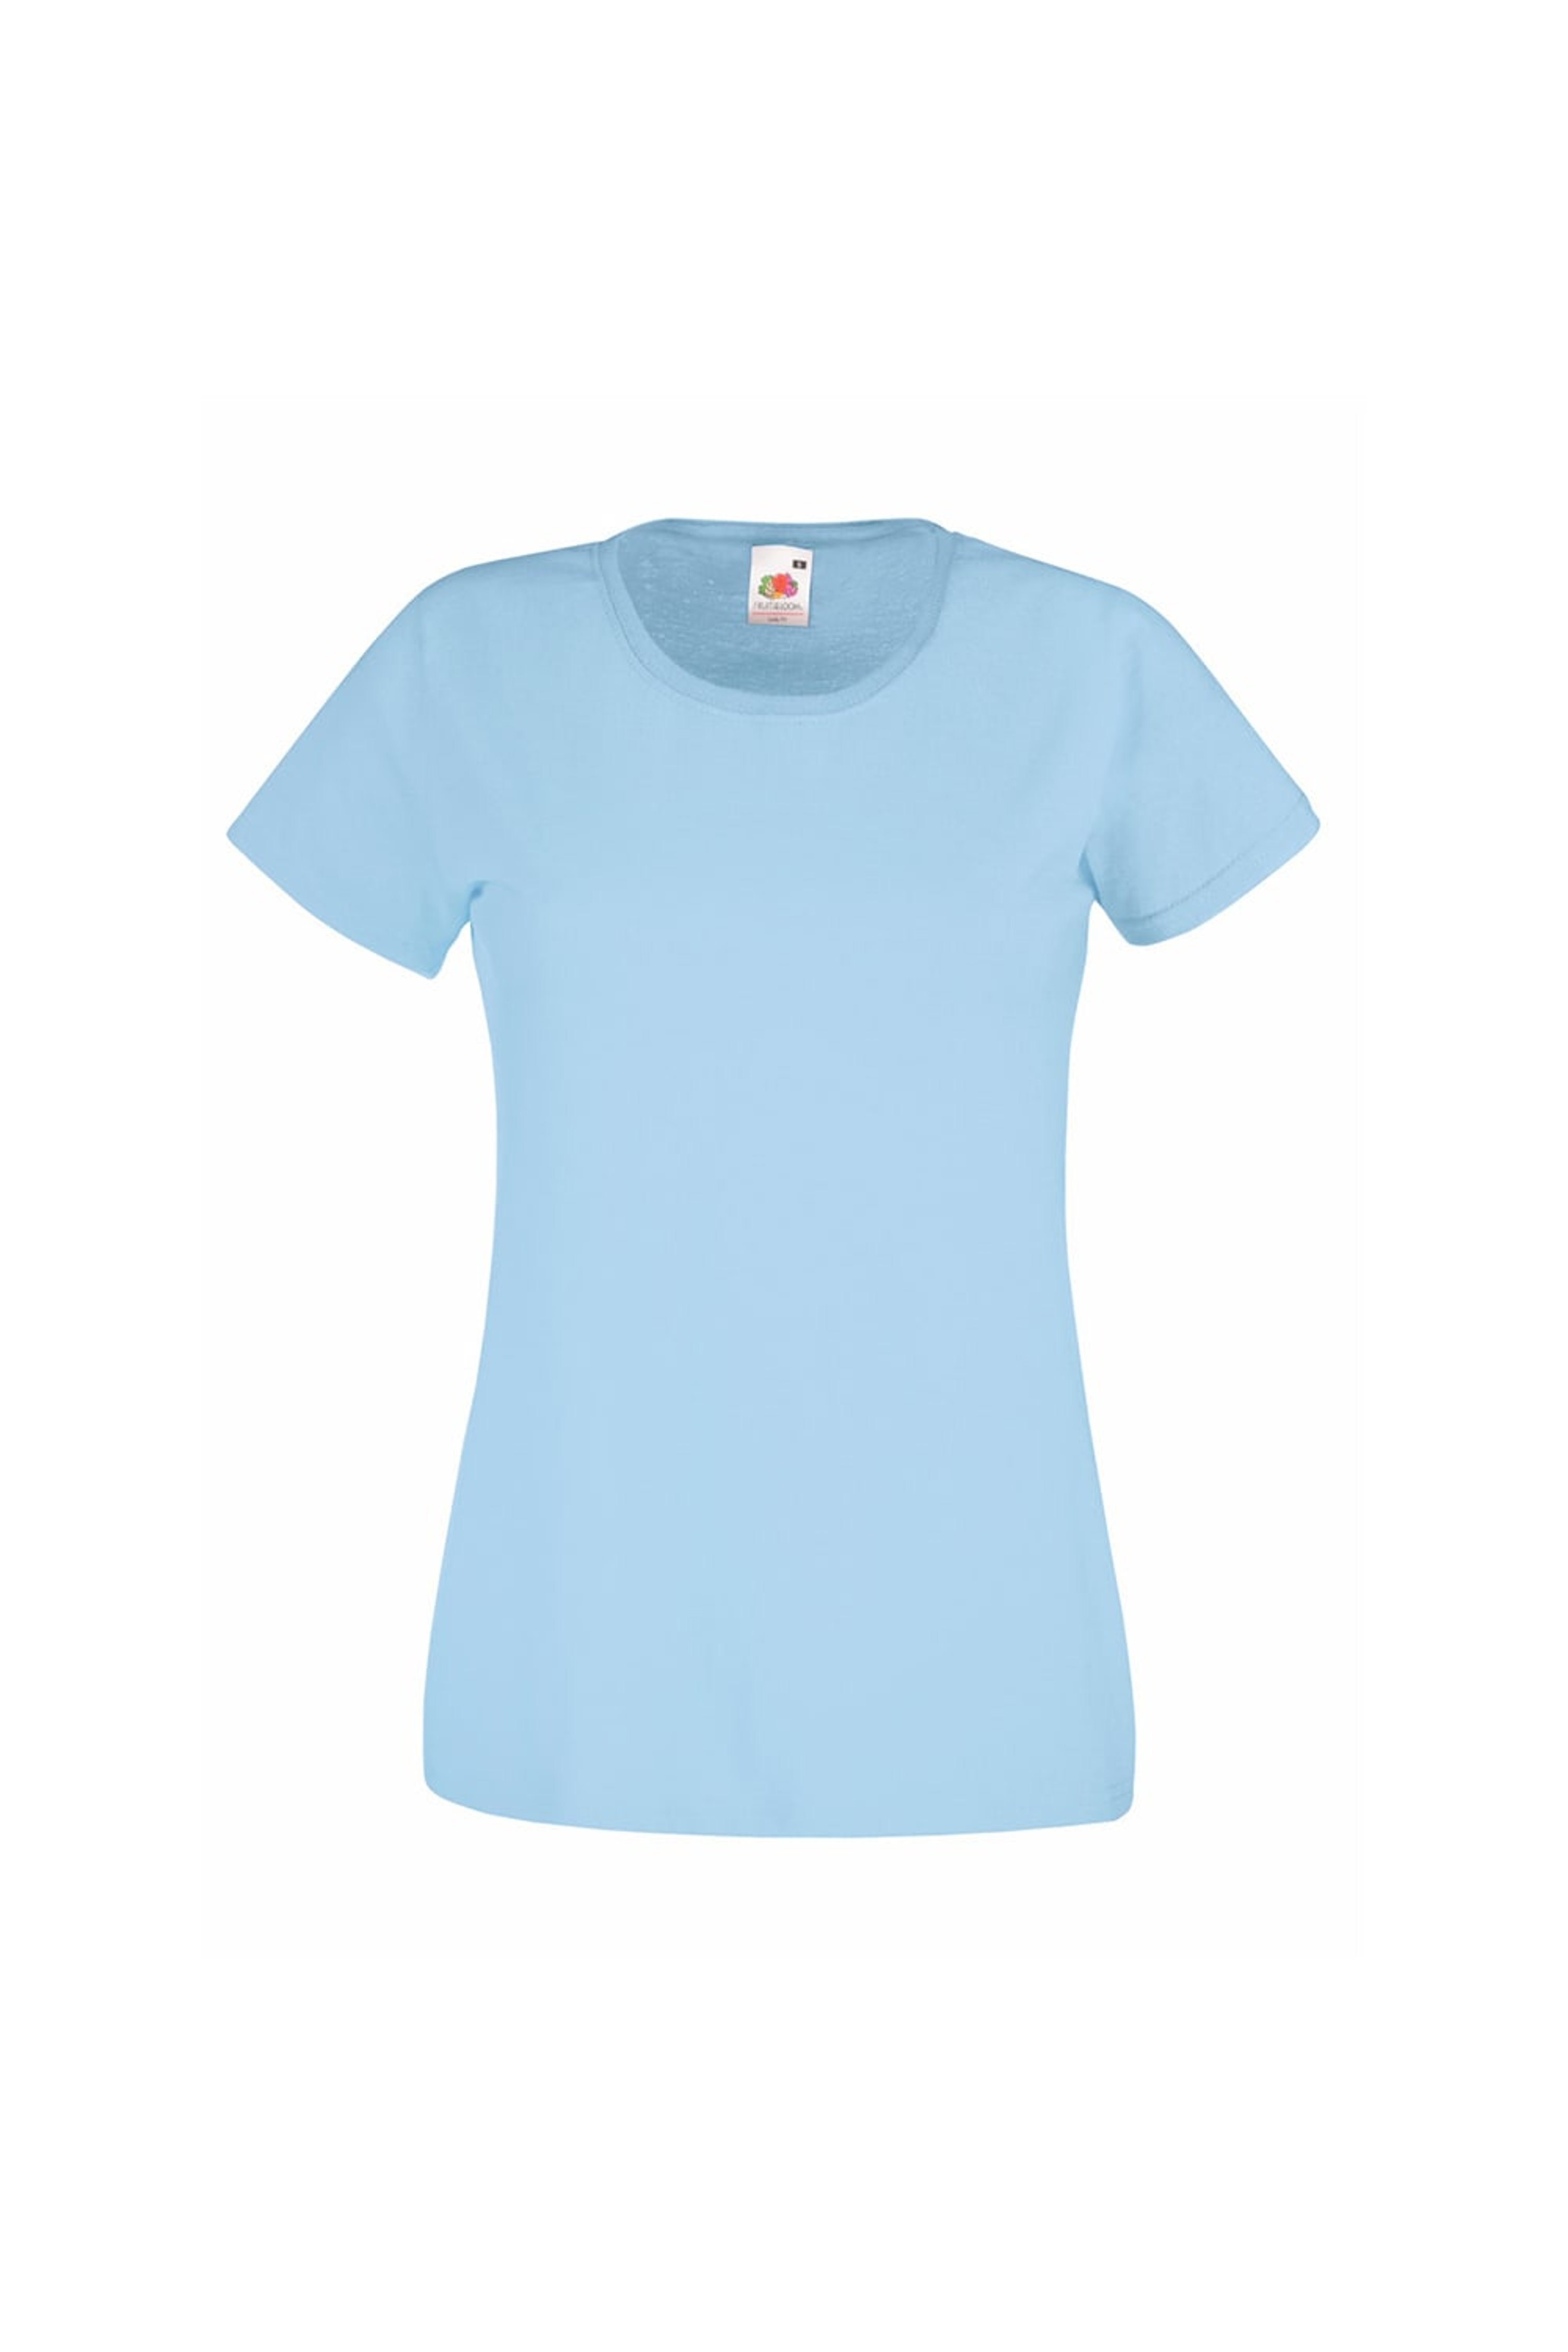 UNIVERSAL TEXTILES UNIVERSAL TEXTILES WOMENS/LADIES VALUE FITTED SHORT SLEEVE CASUAL T-SHIRT (LIGHT BLUE)